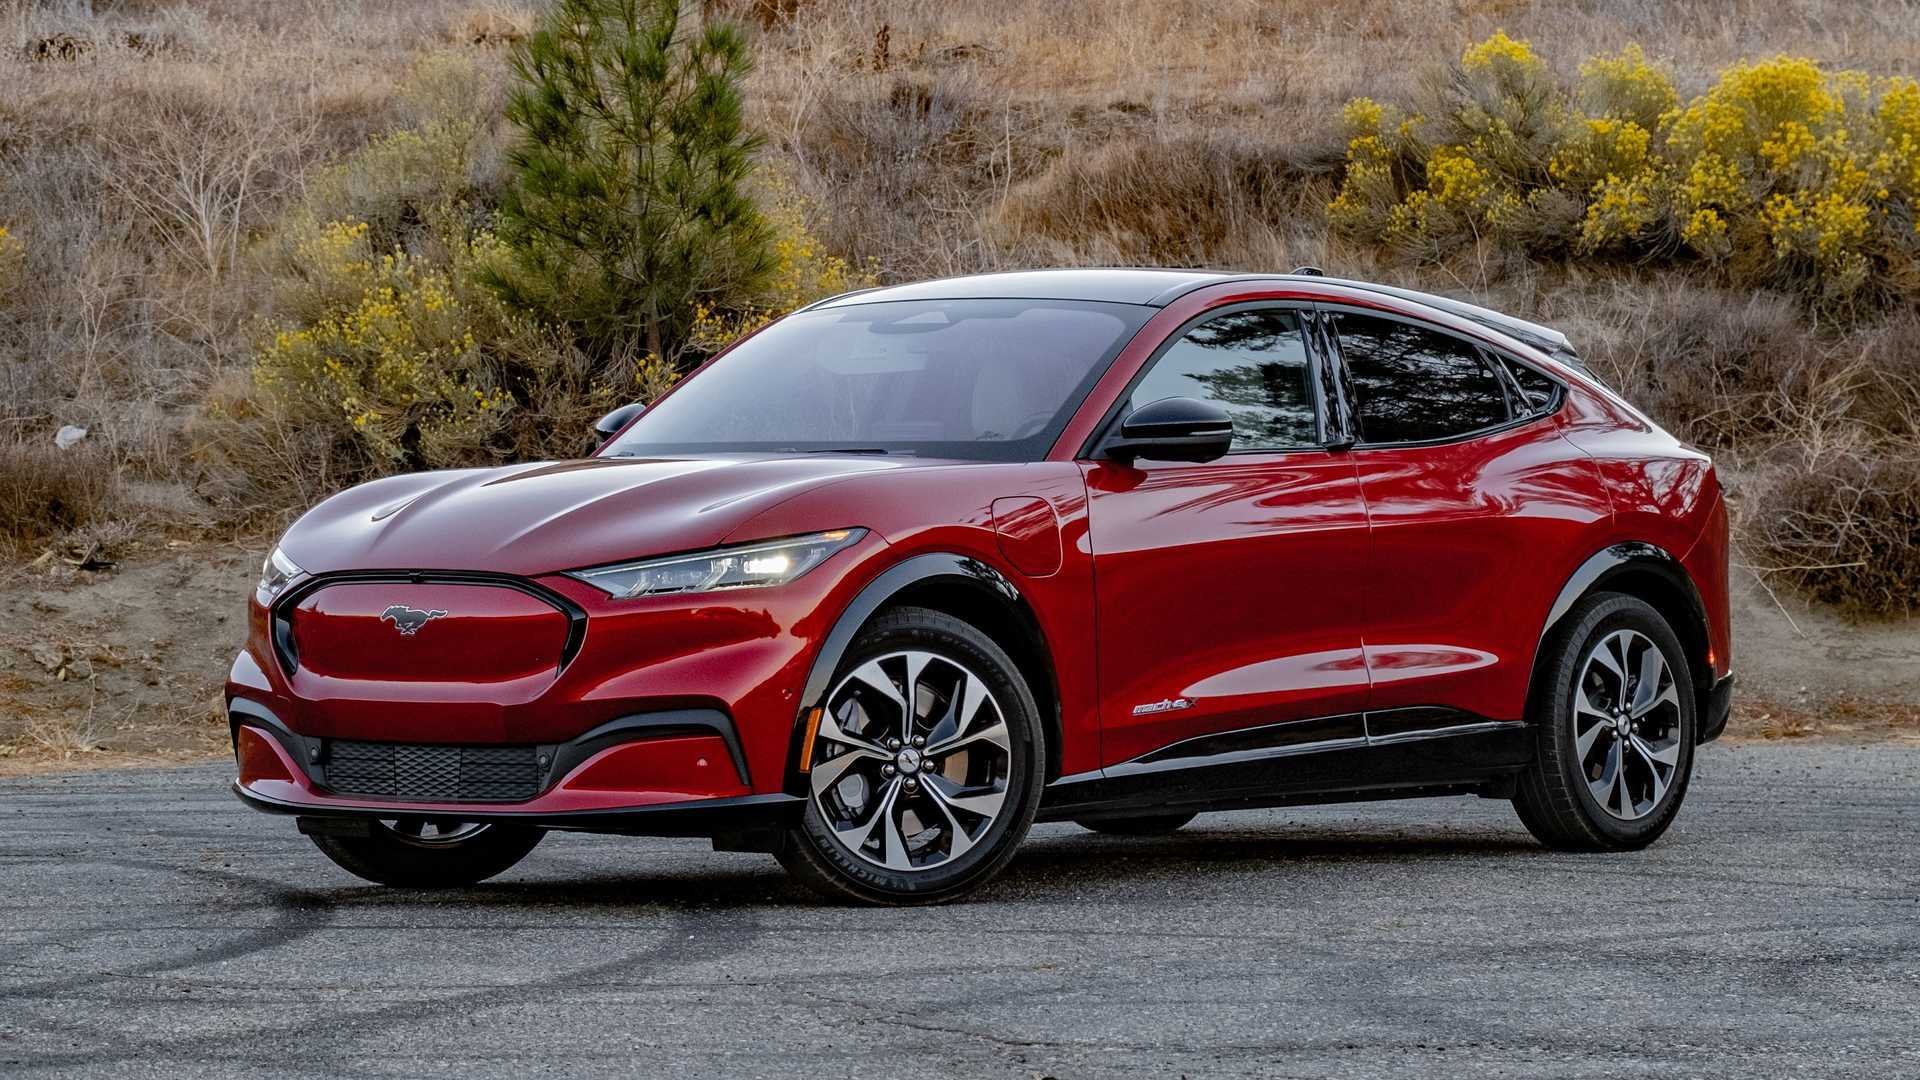 2022 Ford Mustang Mach-E Gets More Range Unlocked